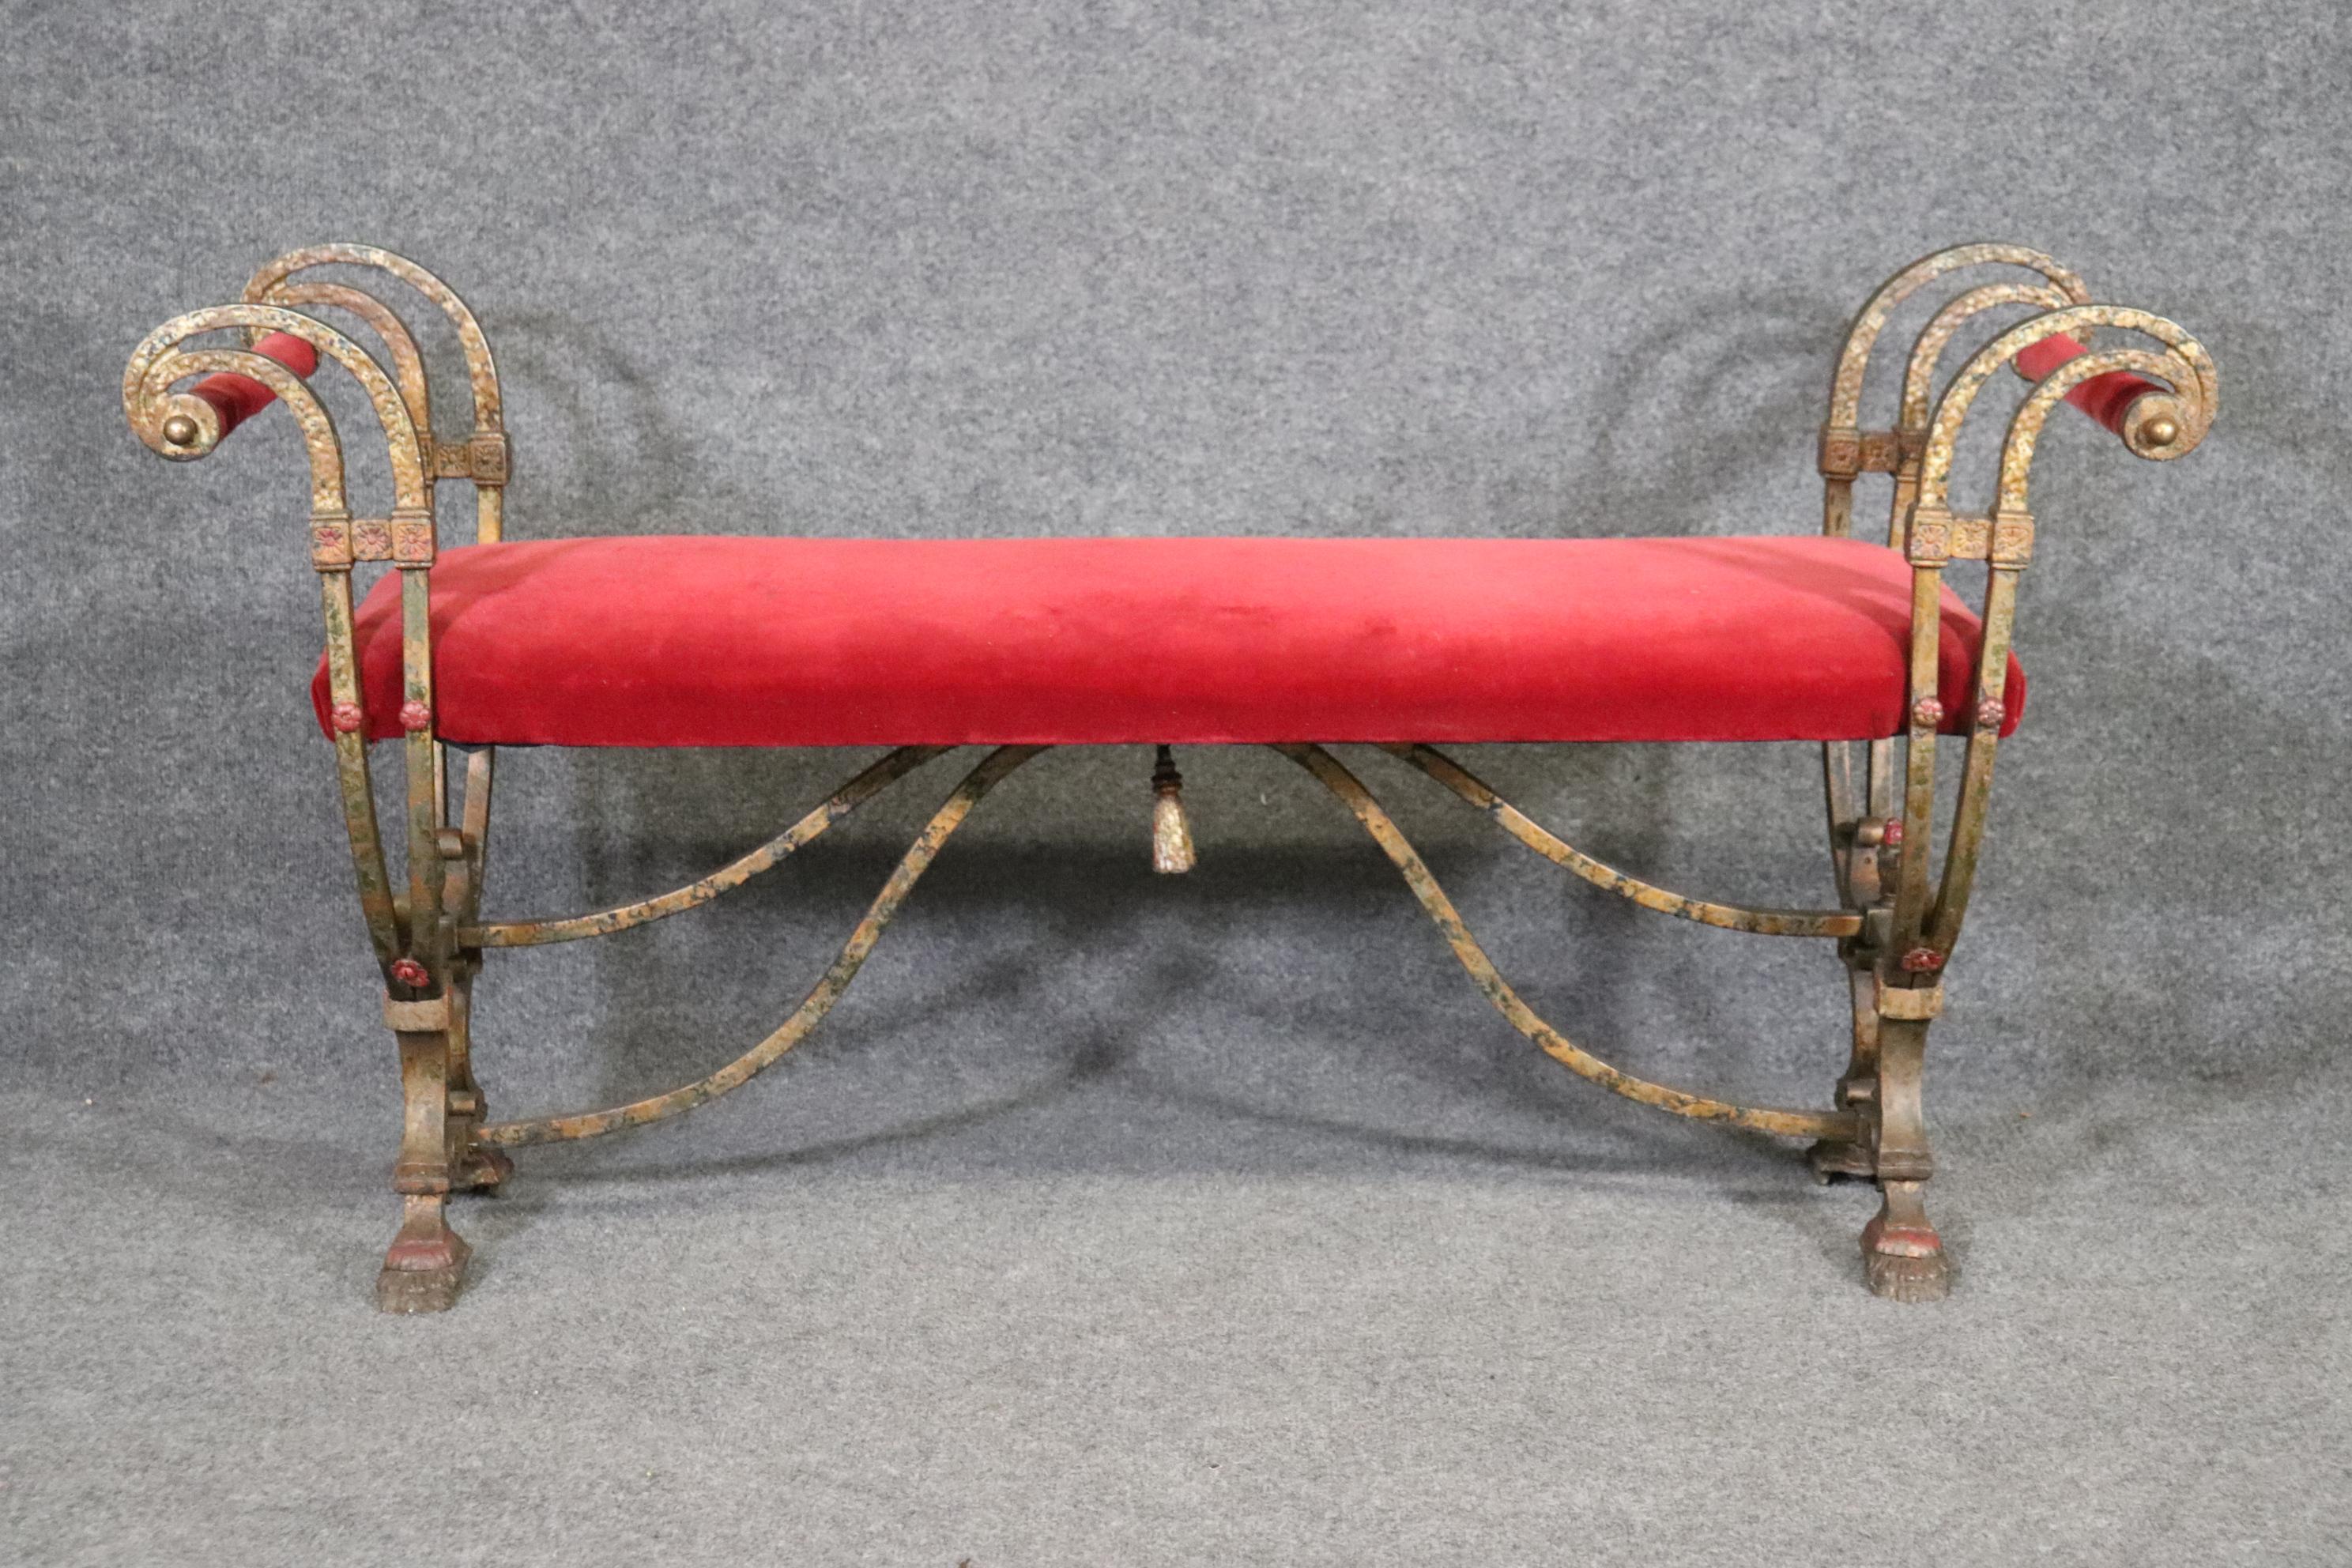 European Oscar Bach Style Hand-Wrought Iron Upholstered Window Bench circa 1930 For Sale